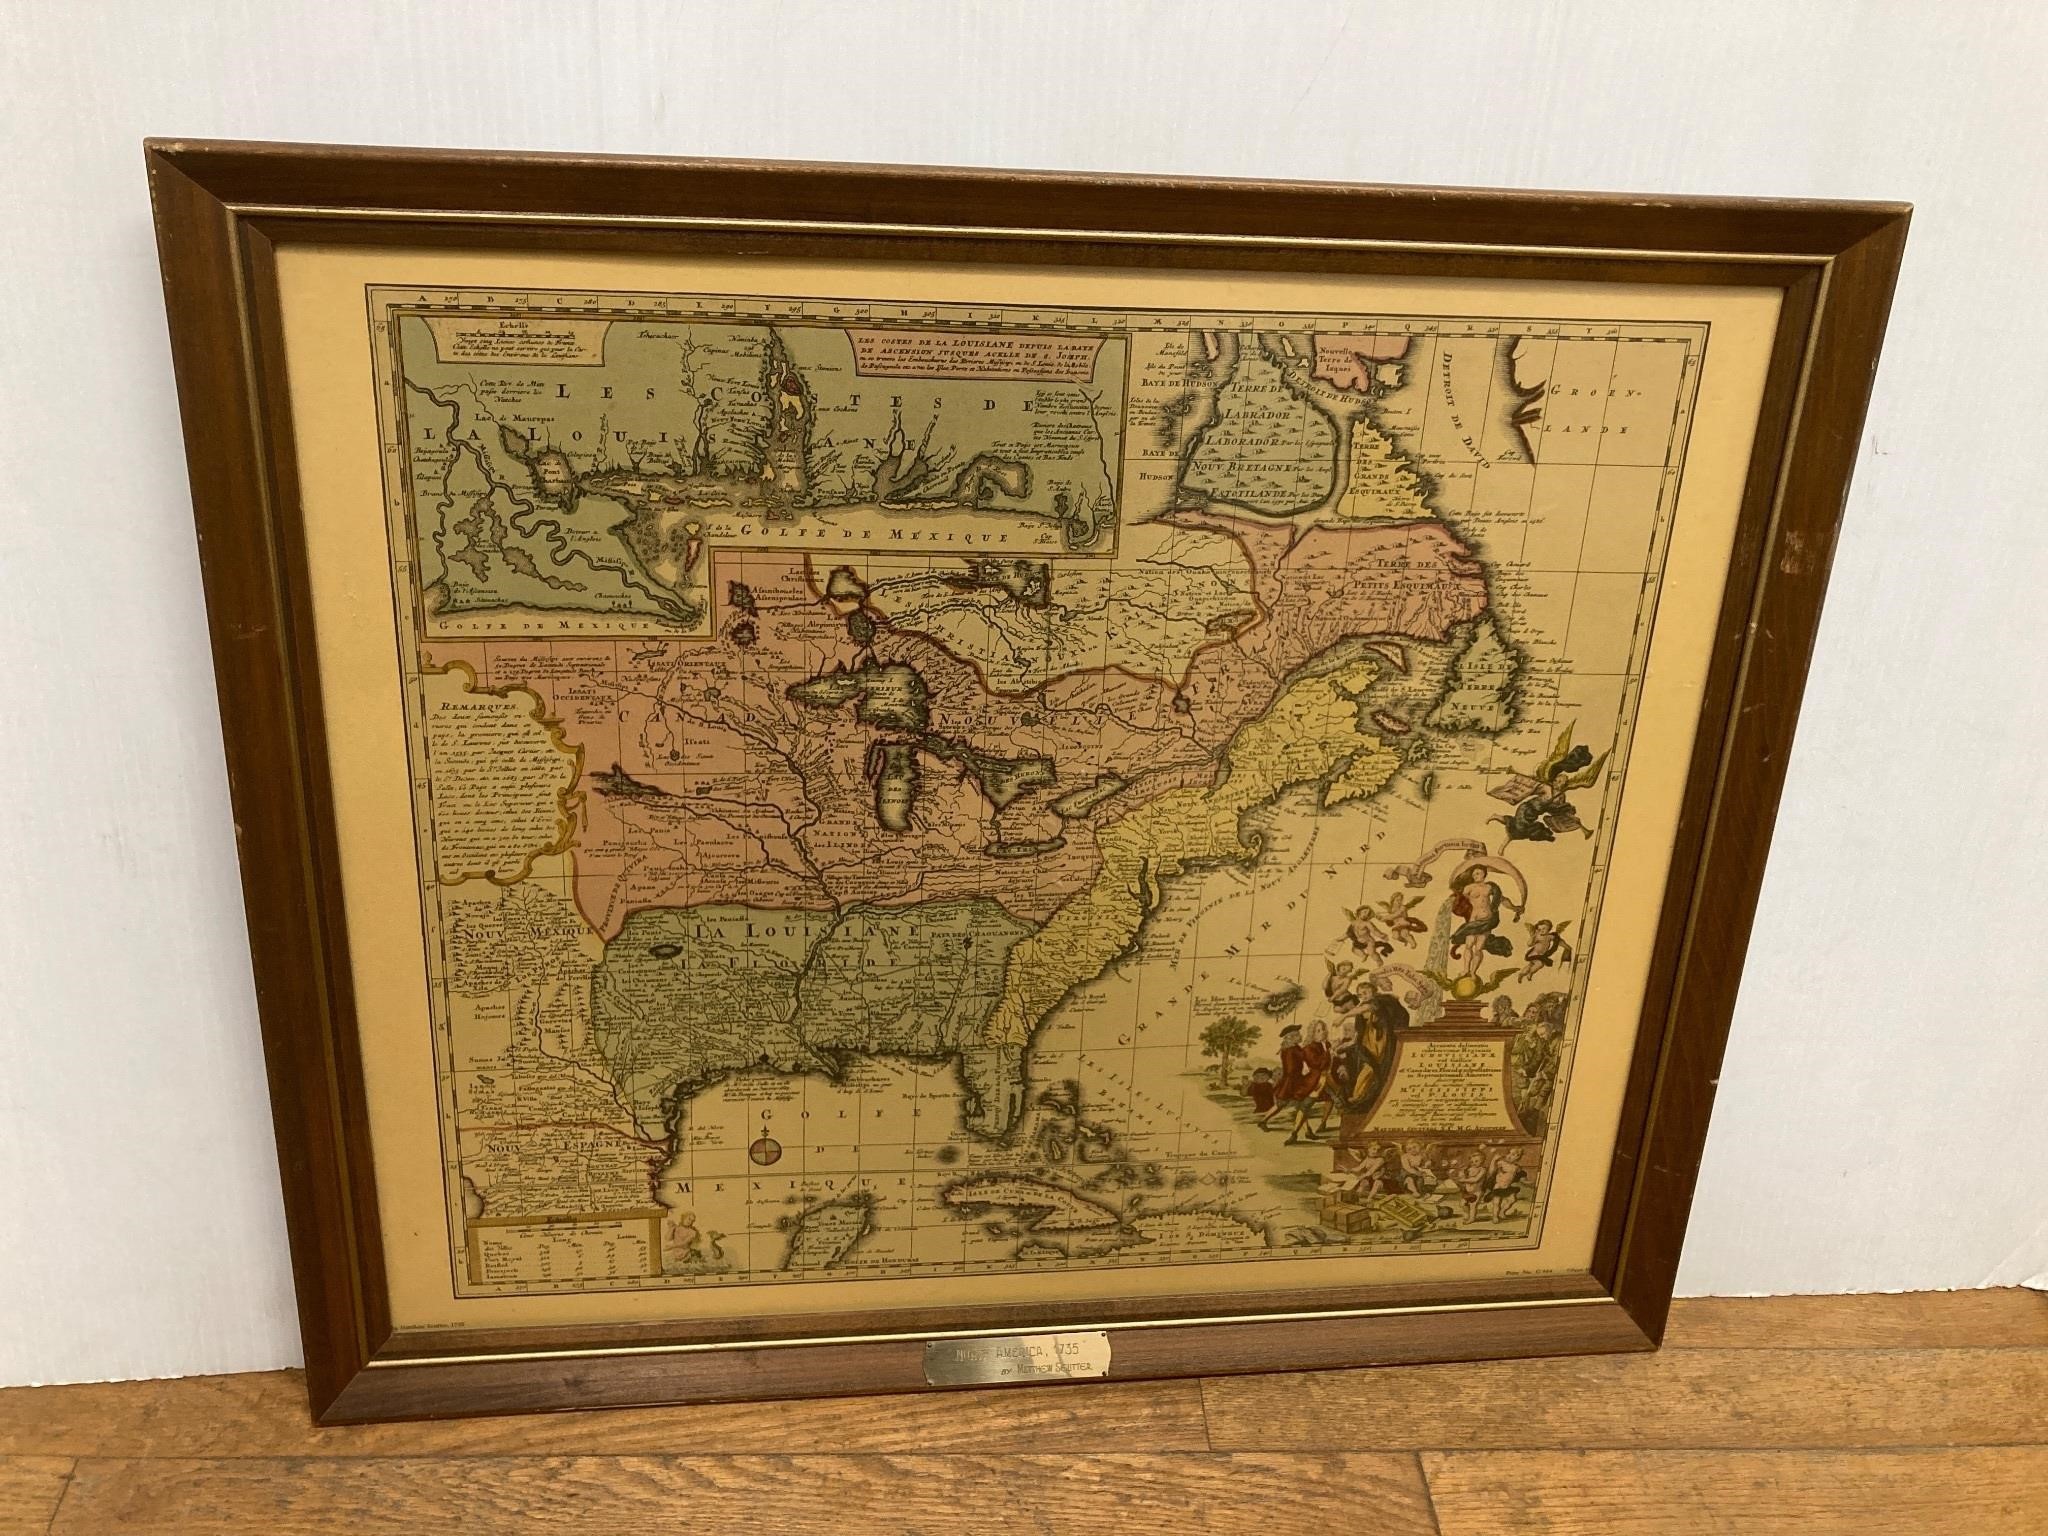 North America map at 1735. 26.25” x 22.25” framed